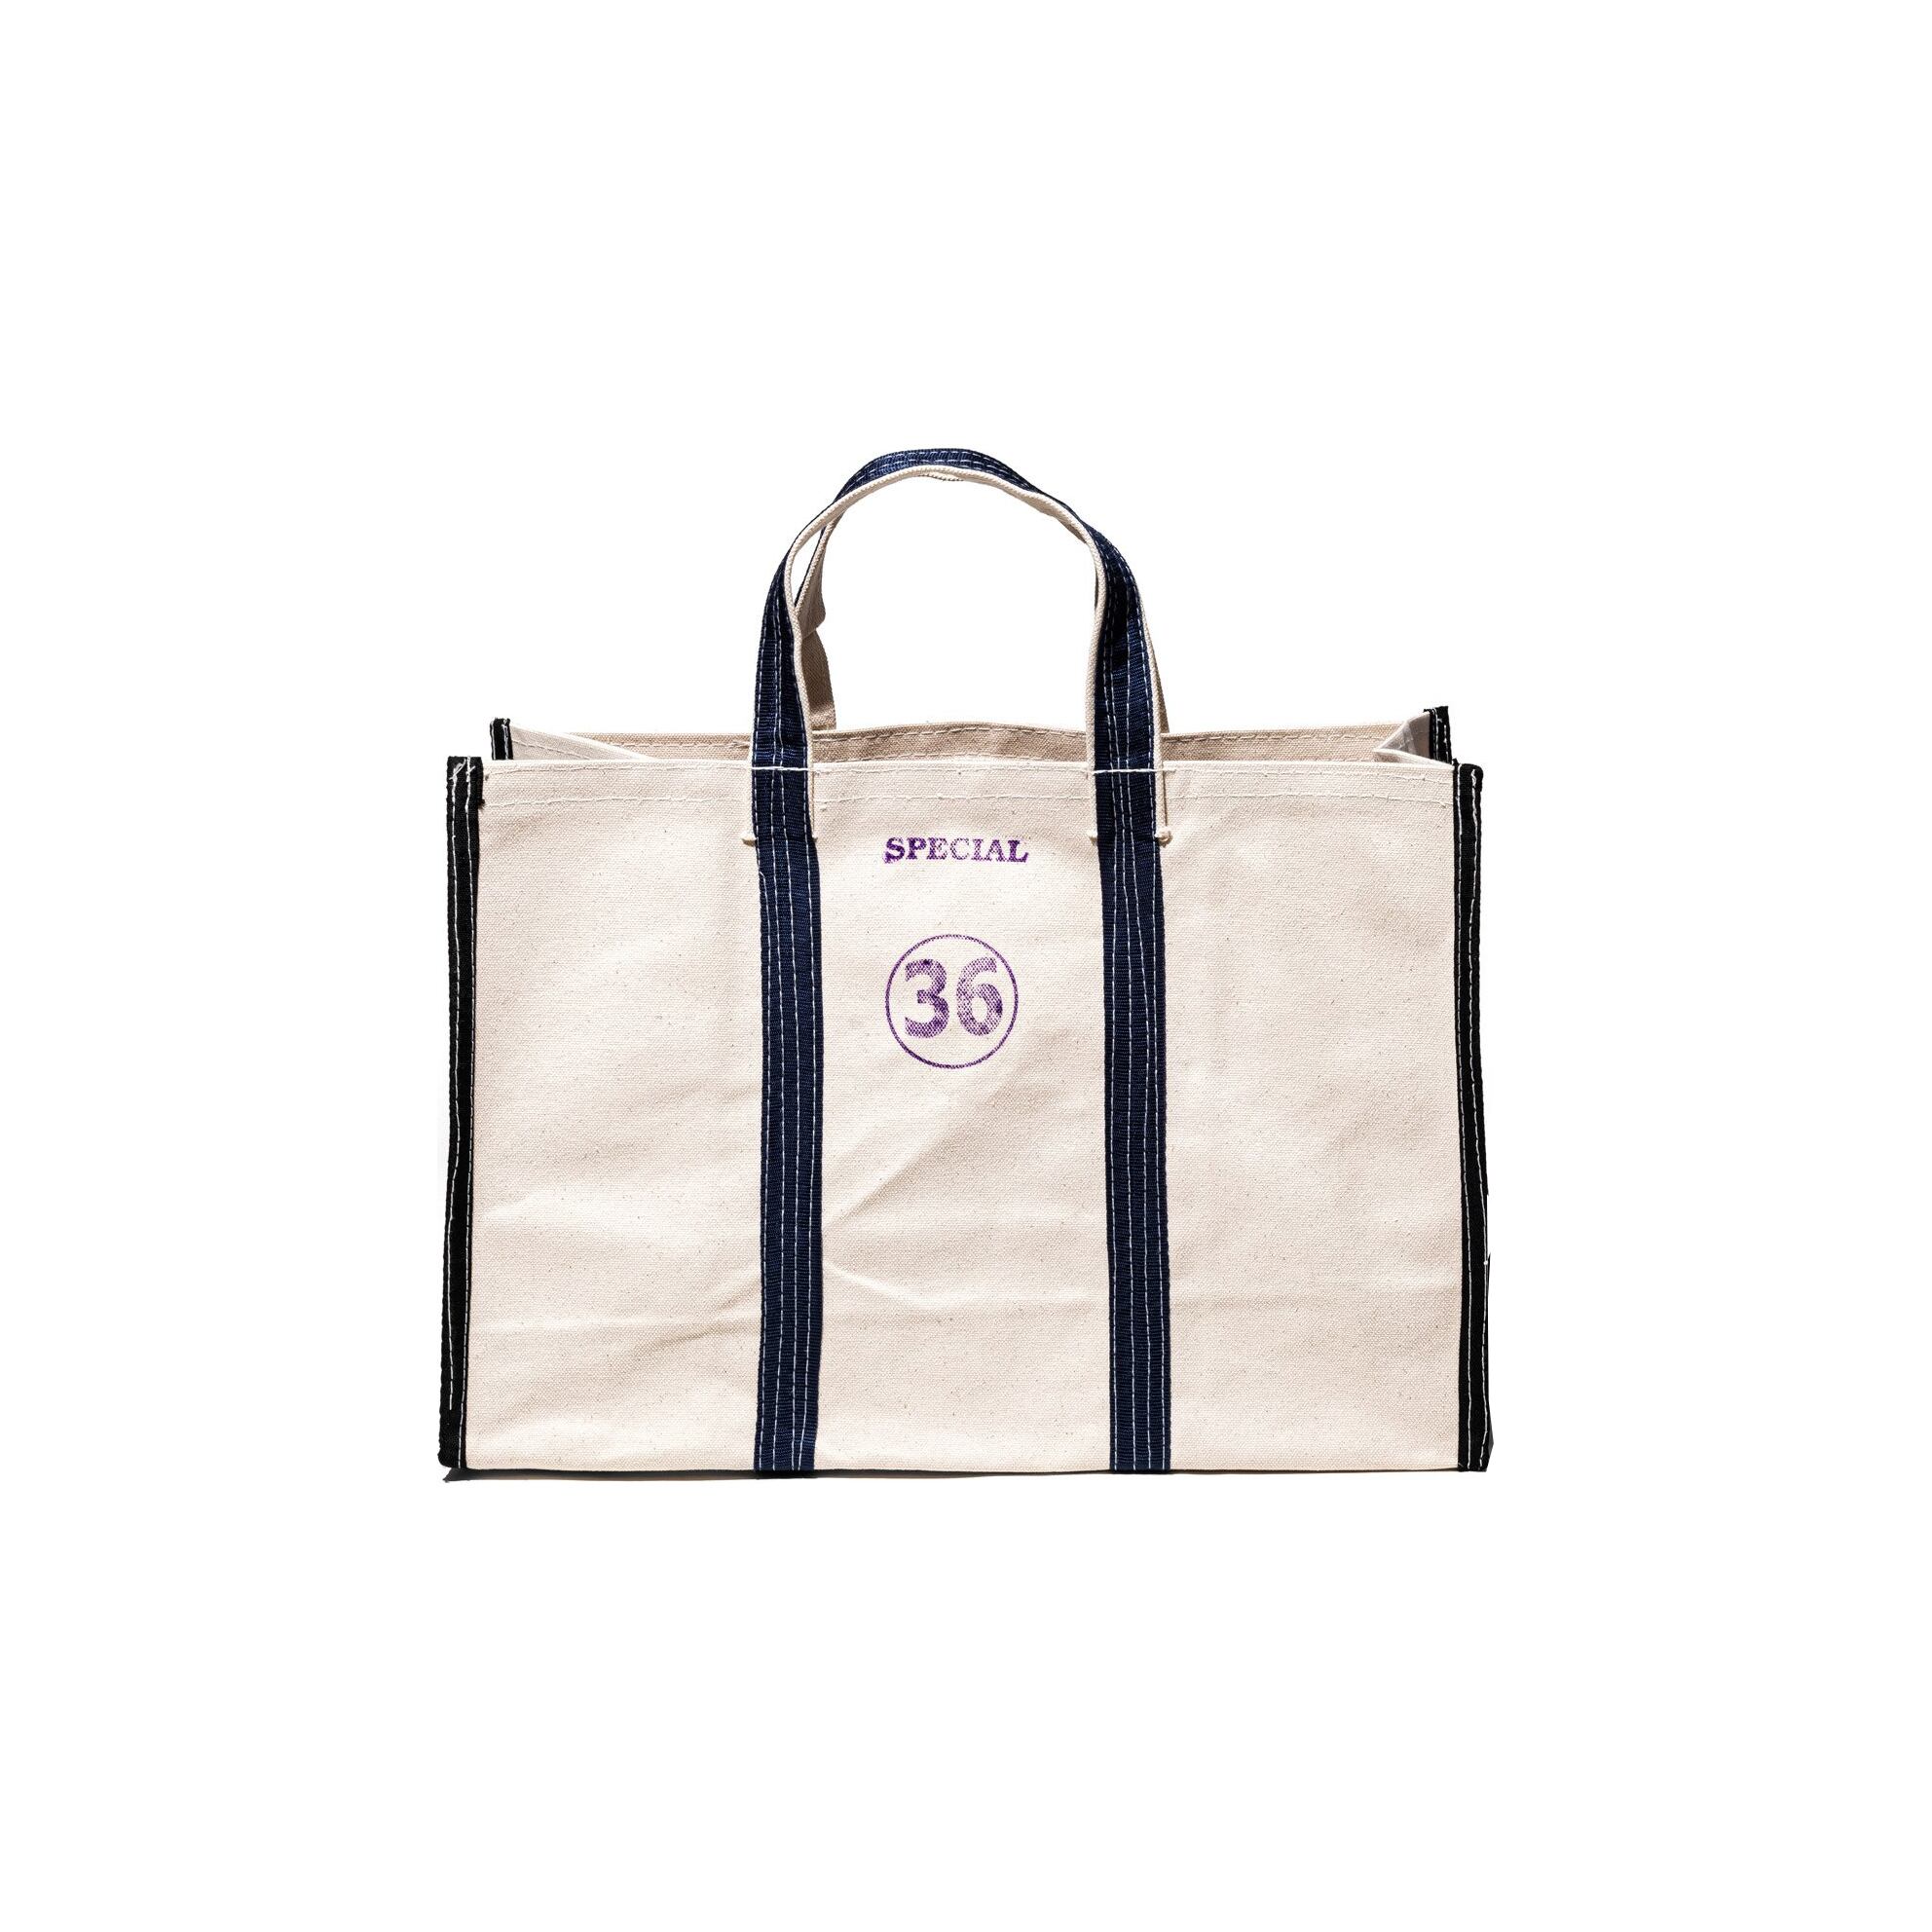 PUEBCO / MARKET TOTE BAG -36- | THE MORNING